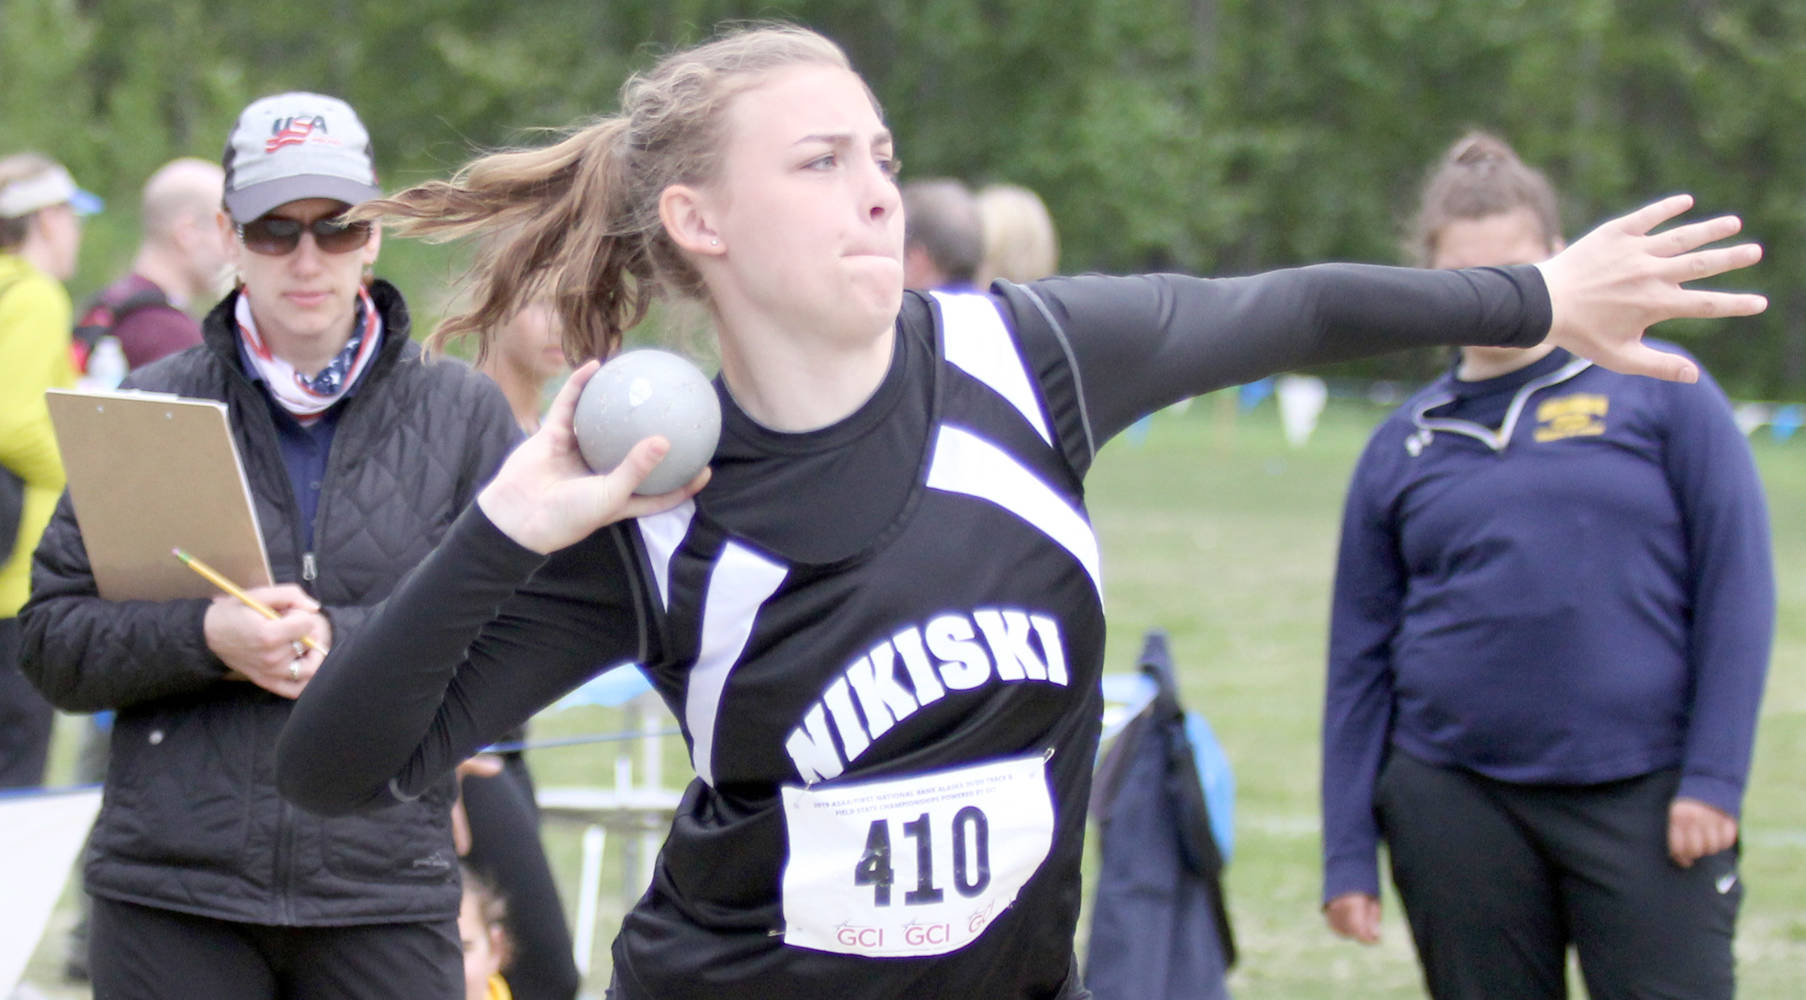 Nikiski senior Bethany Carstens makes her final throw during the Division II girls’ shot put event of the ASAA/First National Bank State Track and Field Championships Friday, May 24, 2019, at Palmer High School.